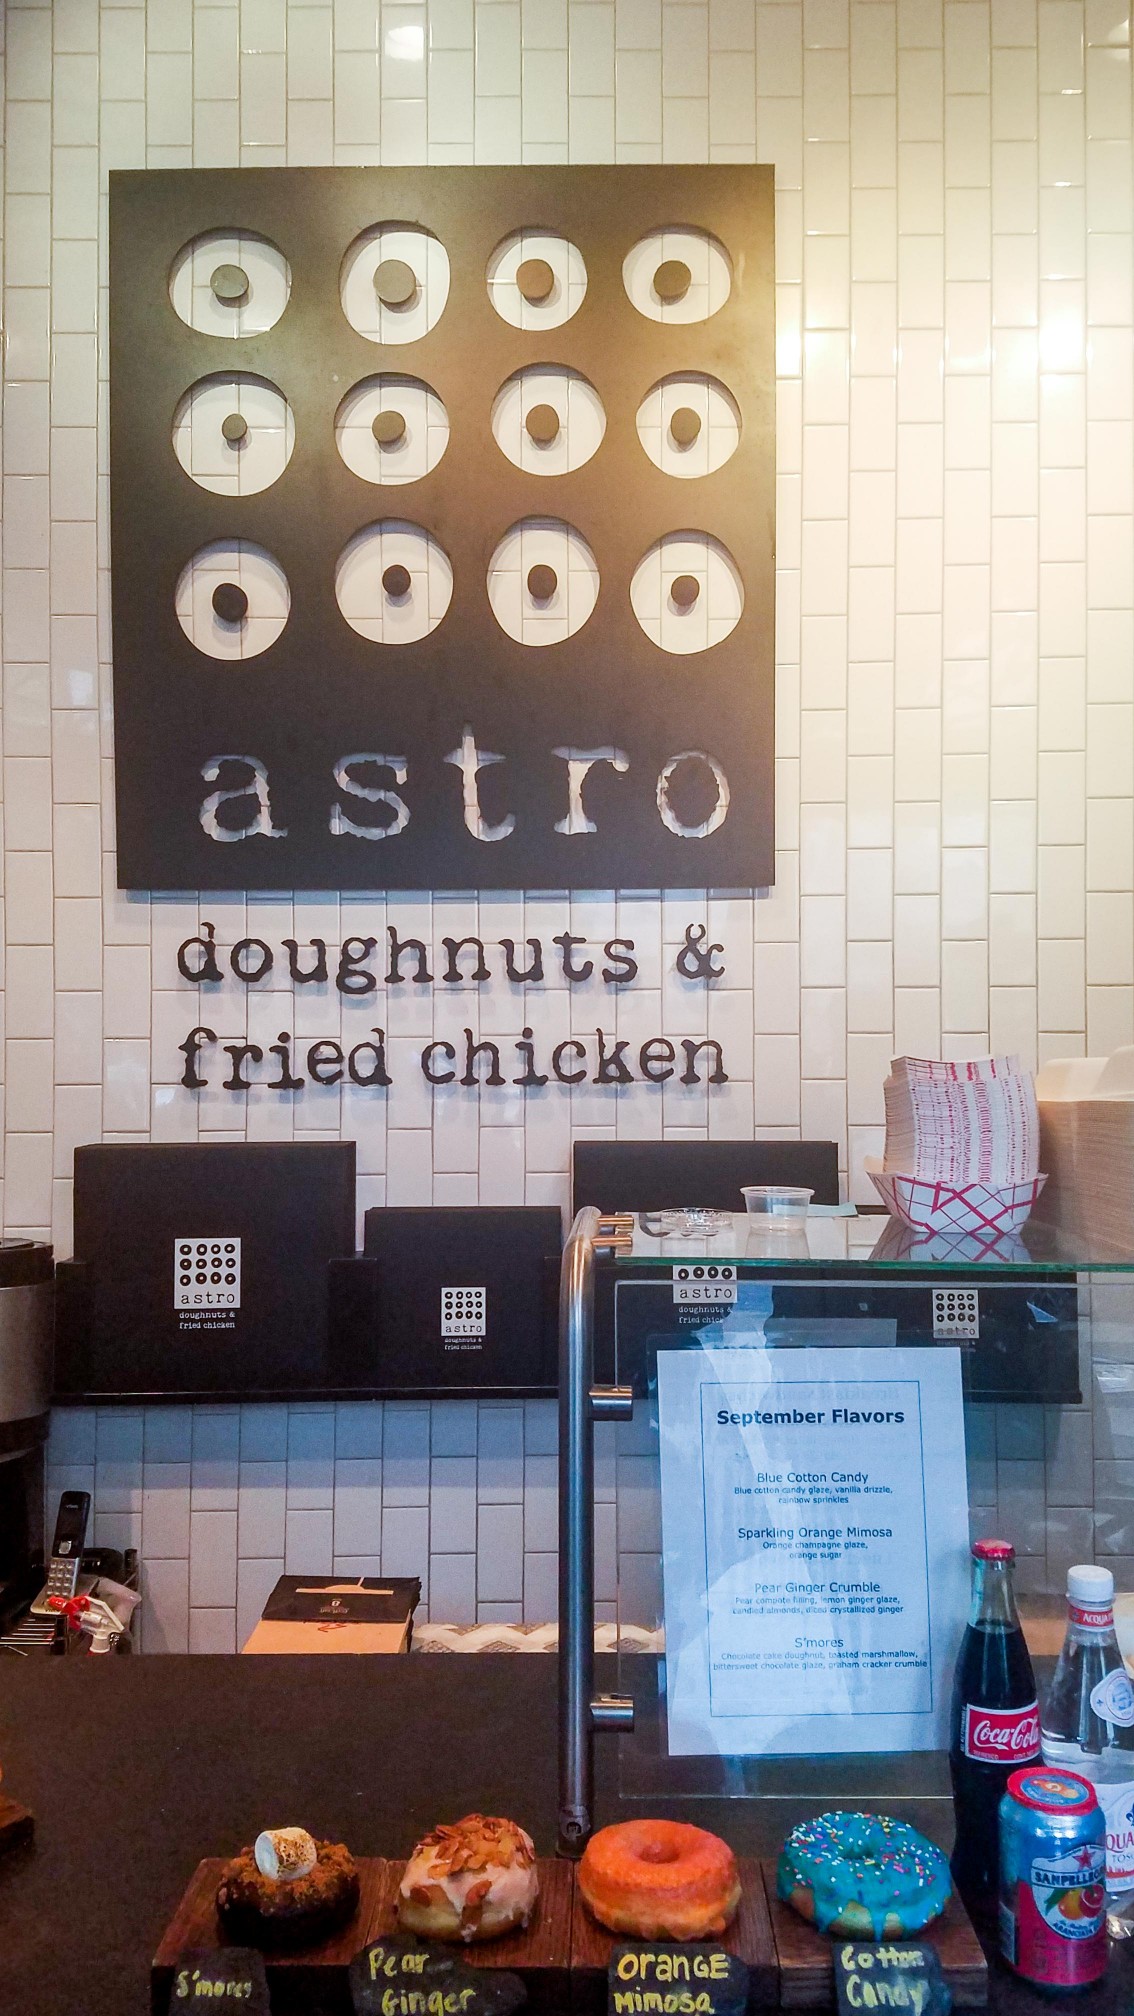 This weekend we tried an incredible fried chicken & donut sandwich at Astro Donuts & Fried Chicken (duh??) and then topped it off with a trip to Milk Bar!